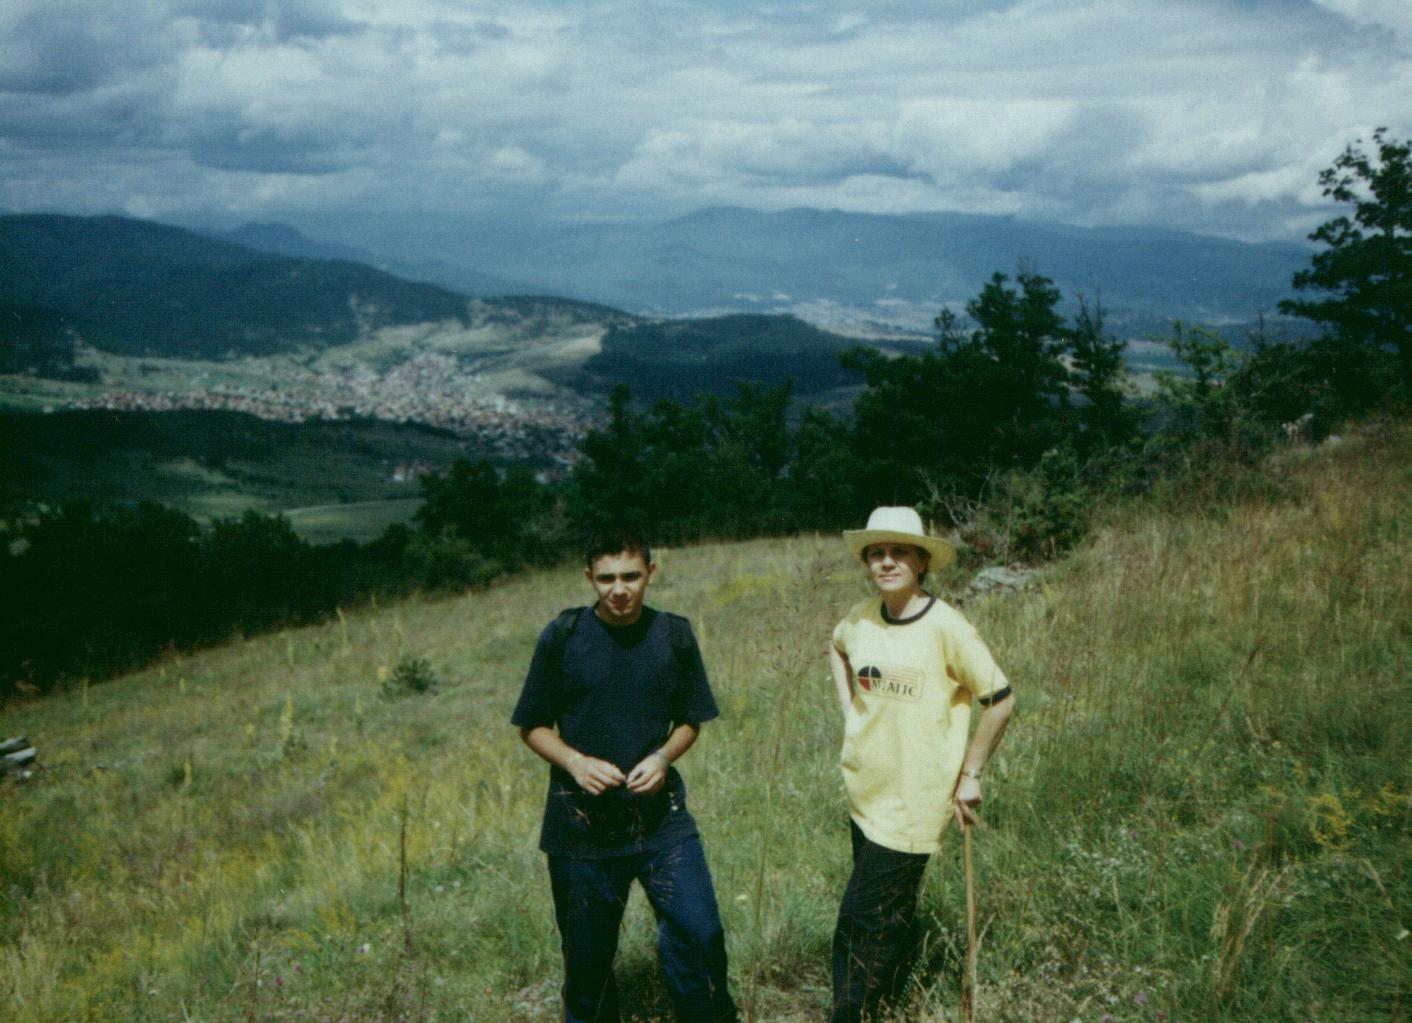 My mother and me near the town of Rakitovo - July 2001